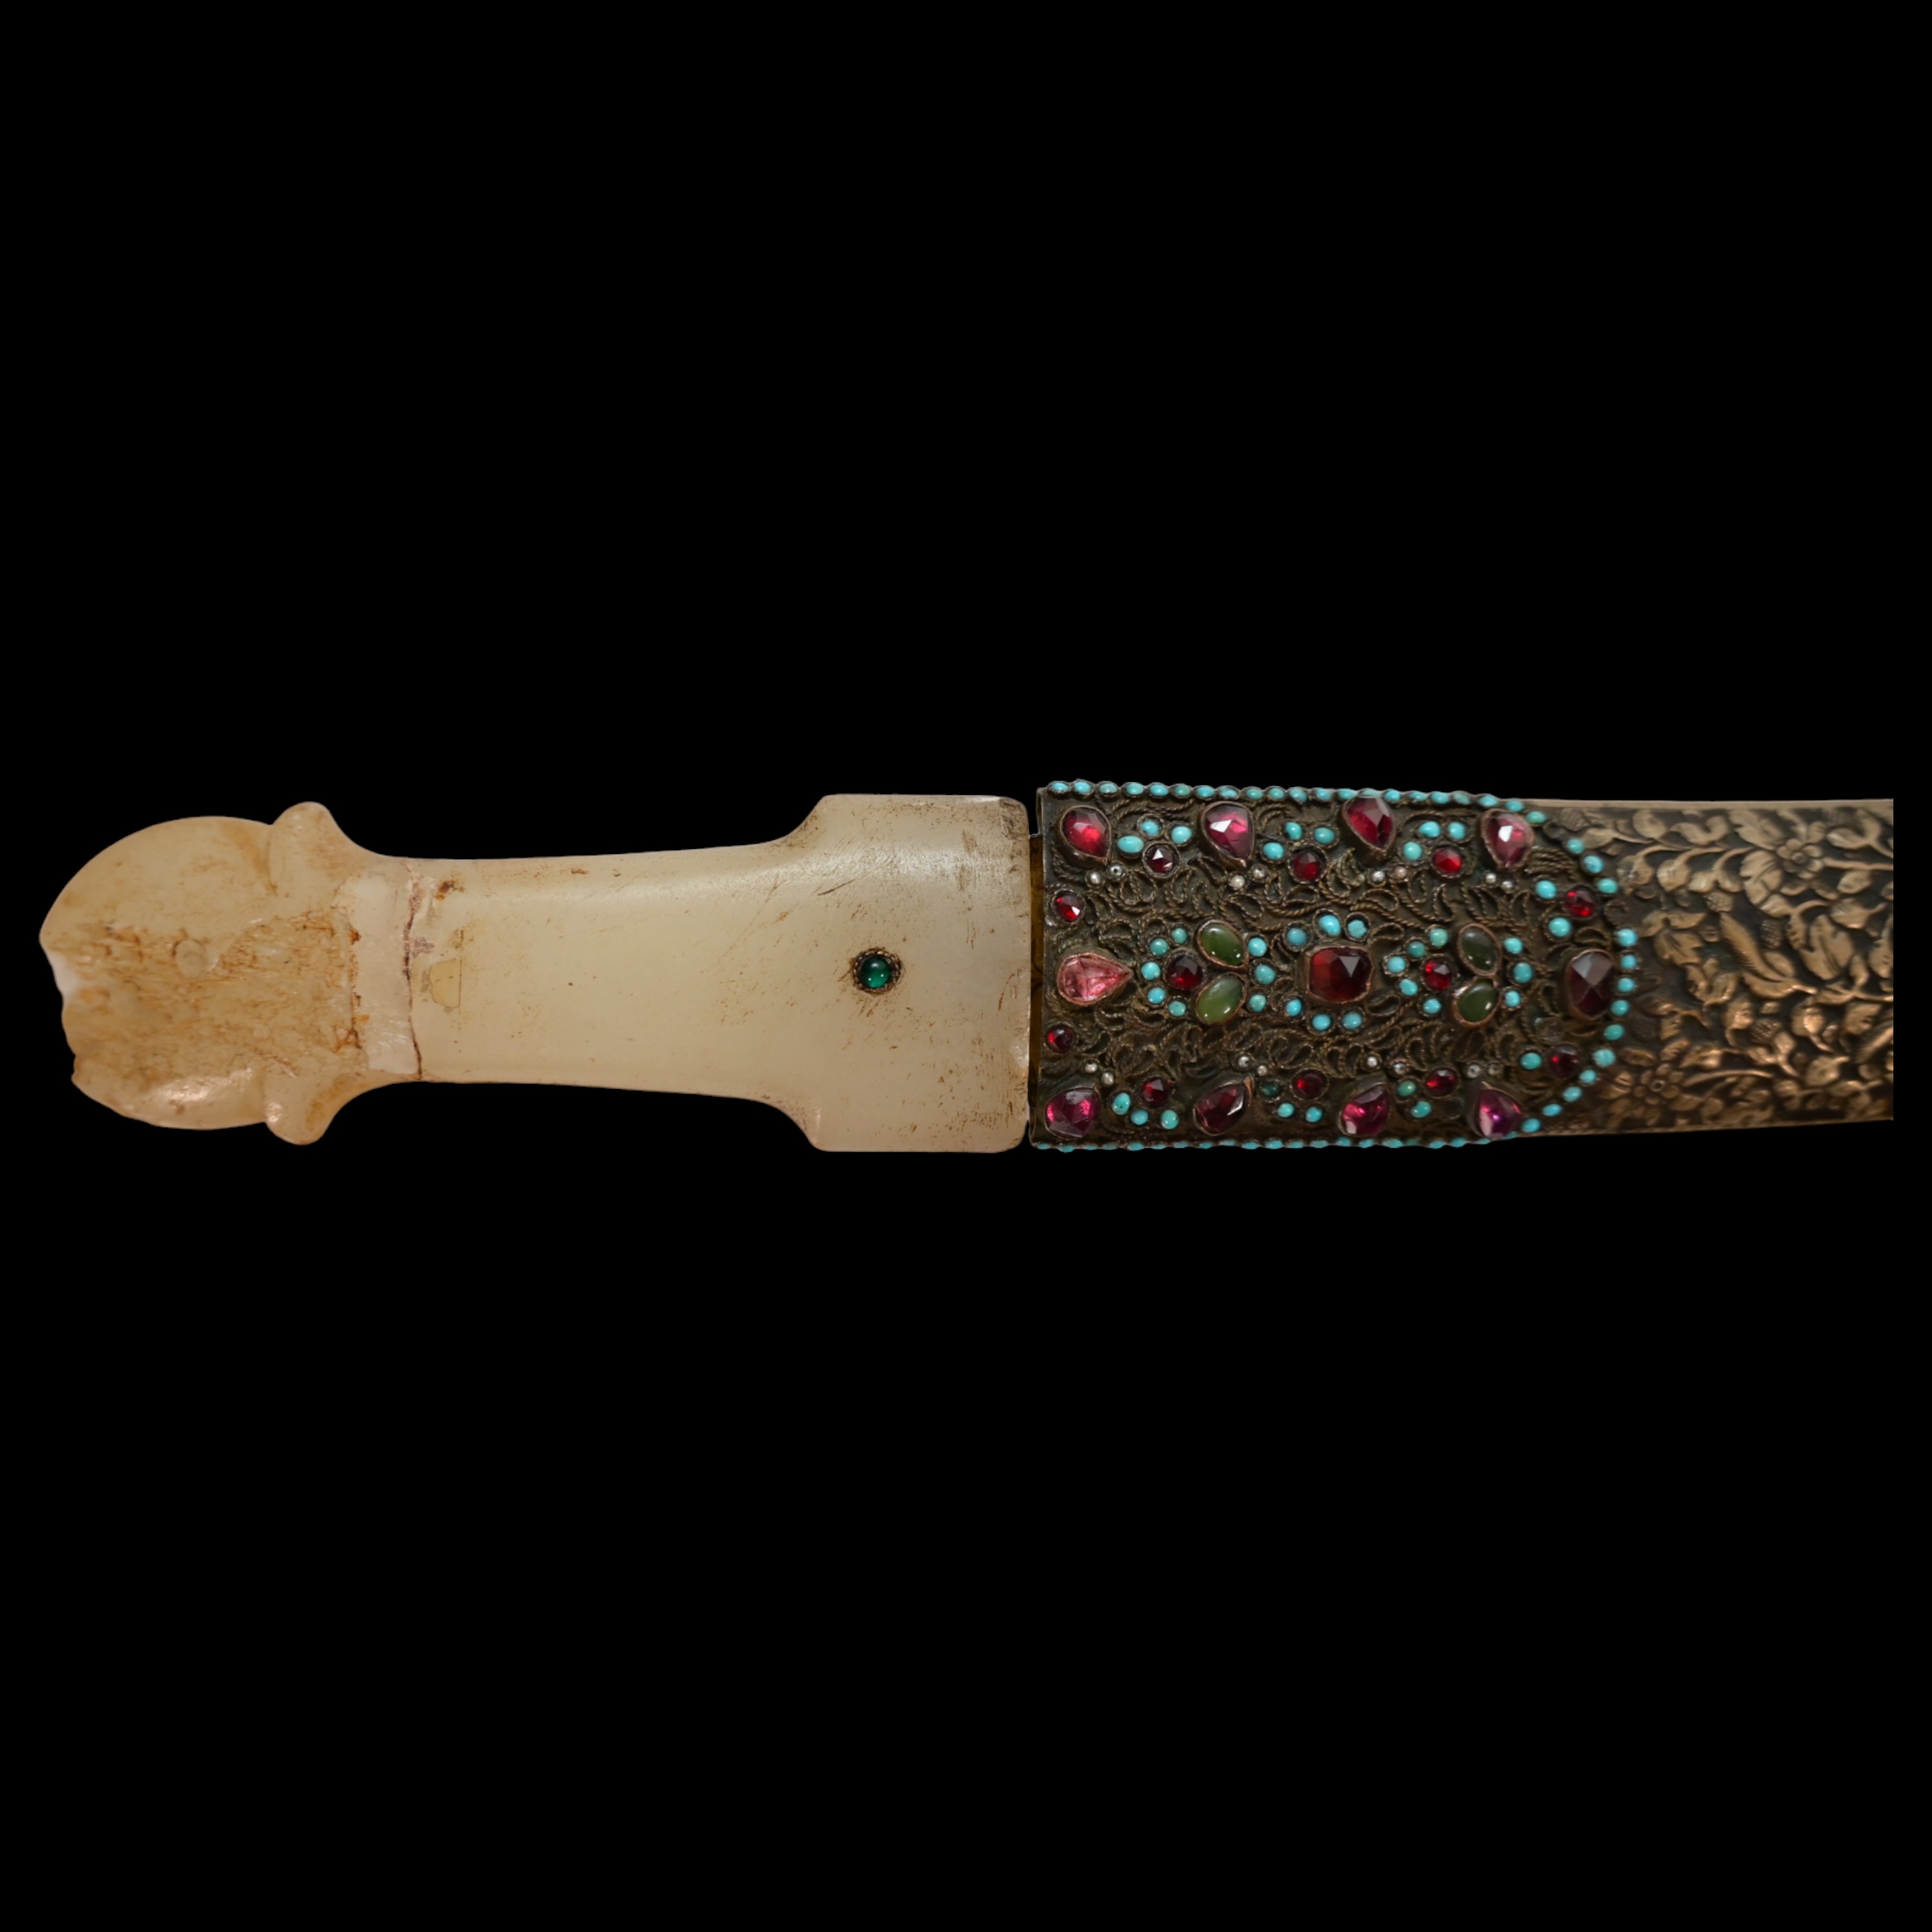 Very rare Dagger with jade handle, Wootz blade, precious stones and gold, Ottoman Empire, 18th C. - Image 4 of 19